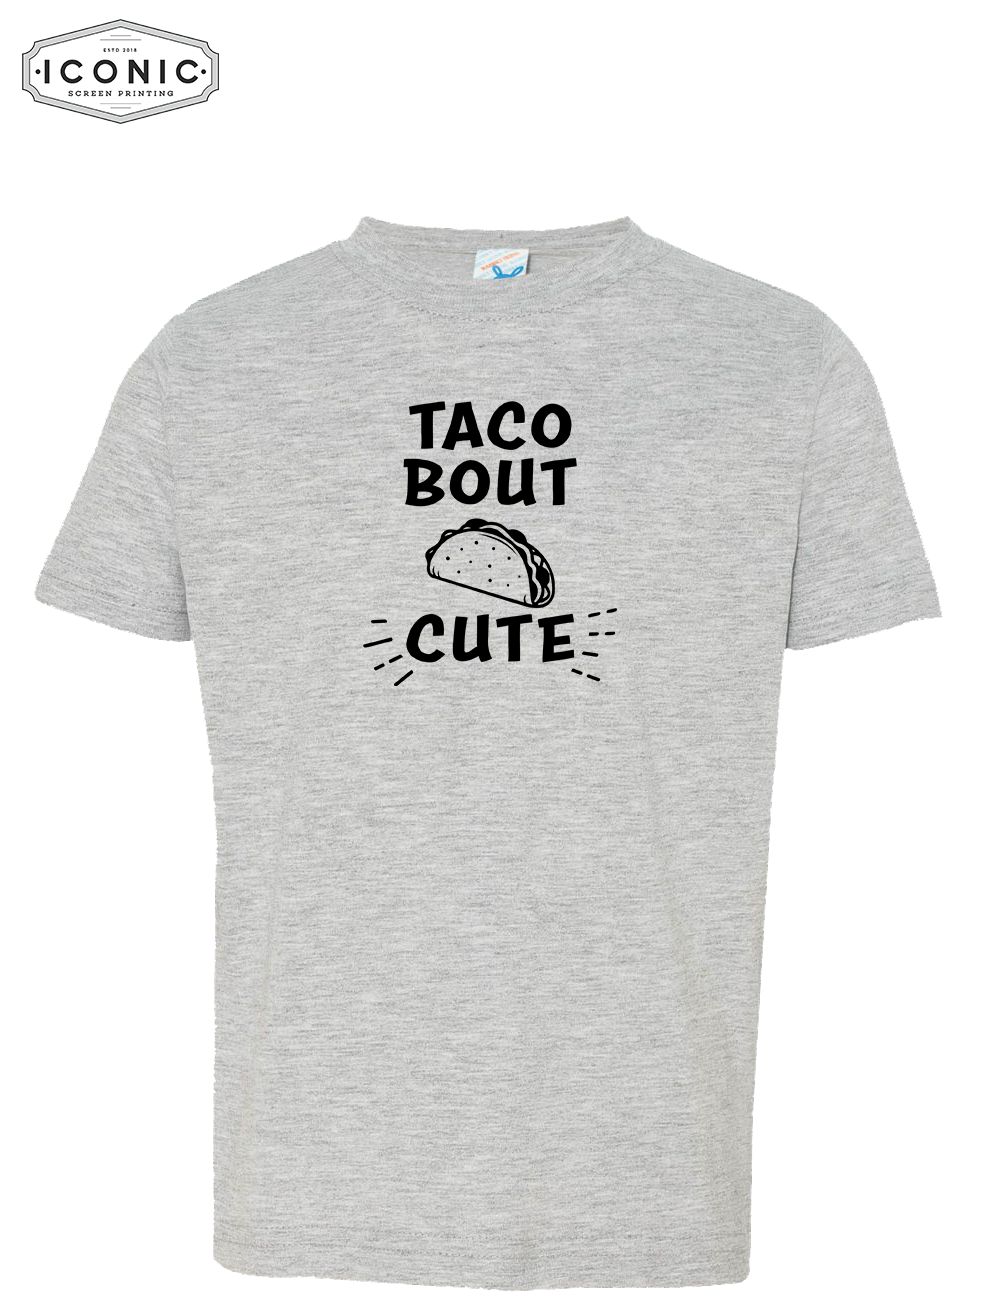 Tacobout Cute! - Toddler Fine Jersey Tee